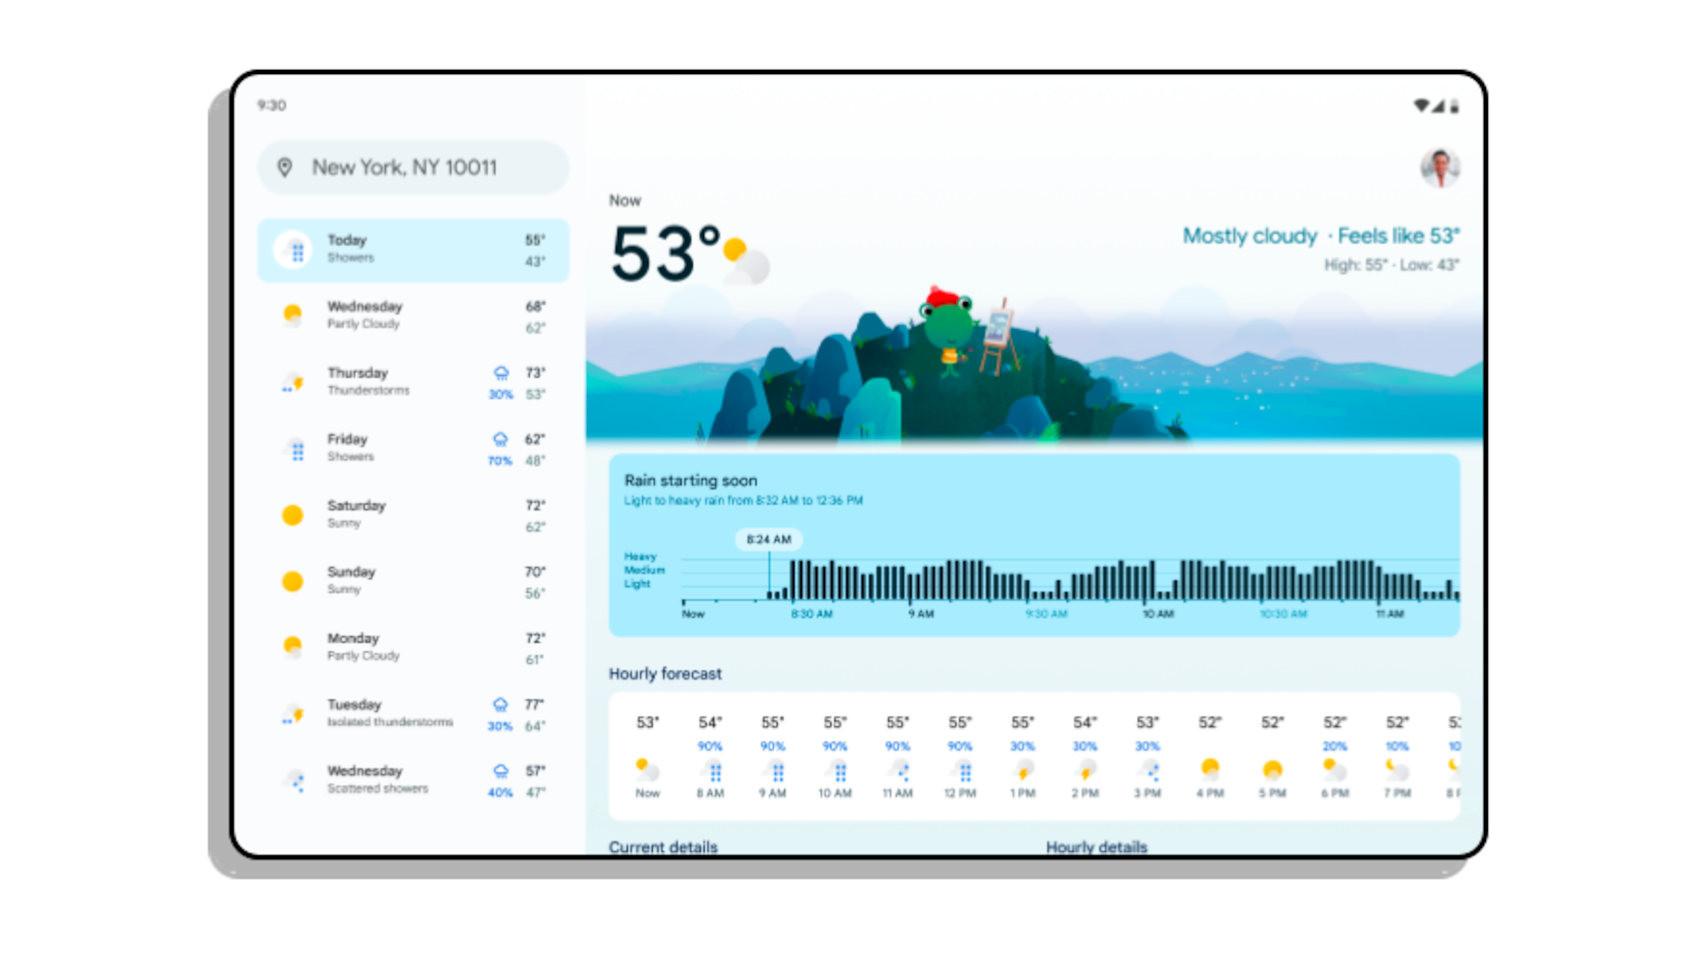 Google's weather app will warn you using artificial intelligence